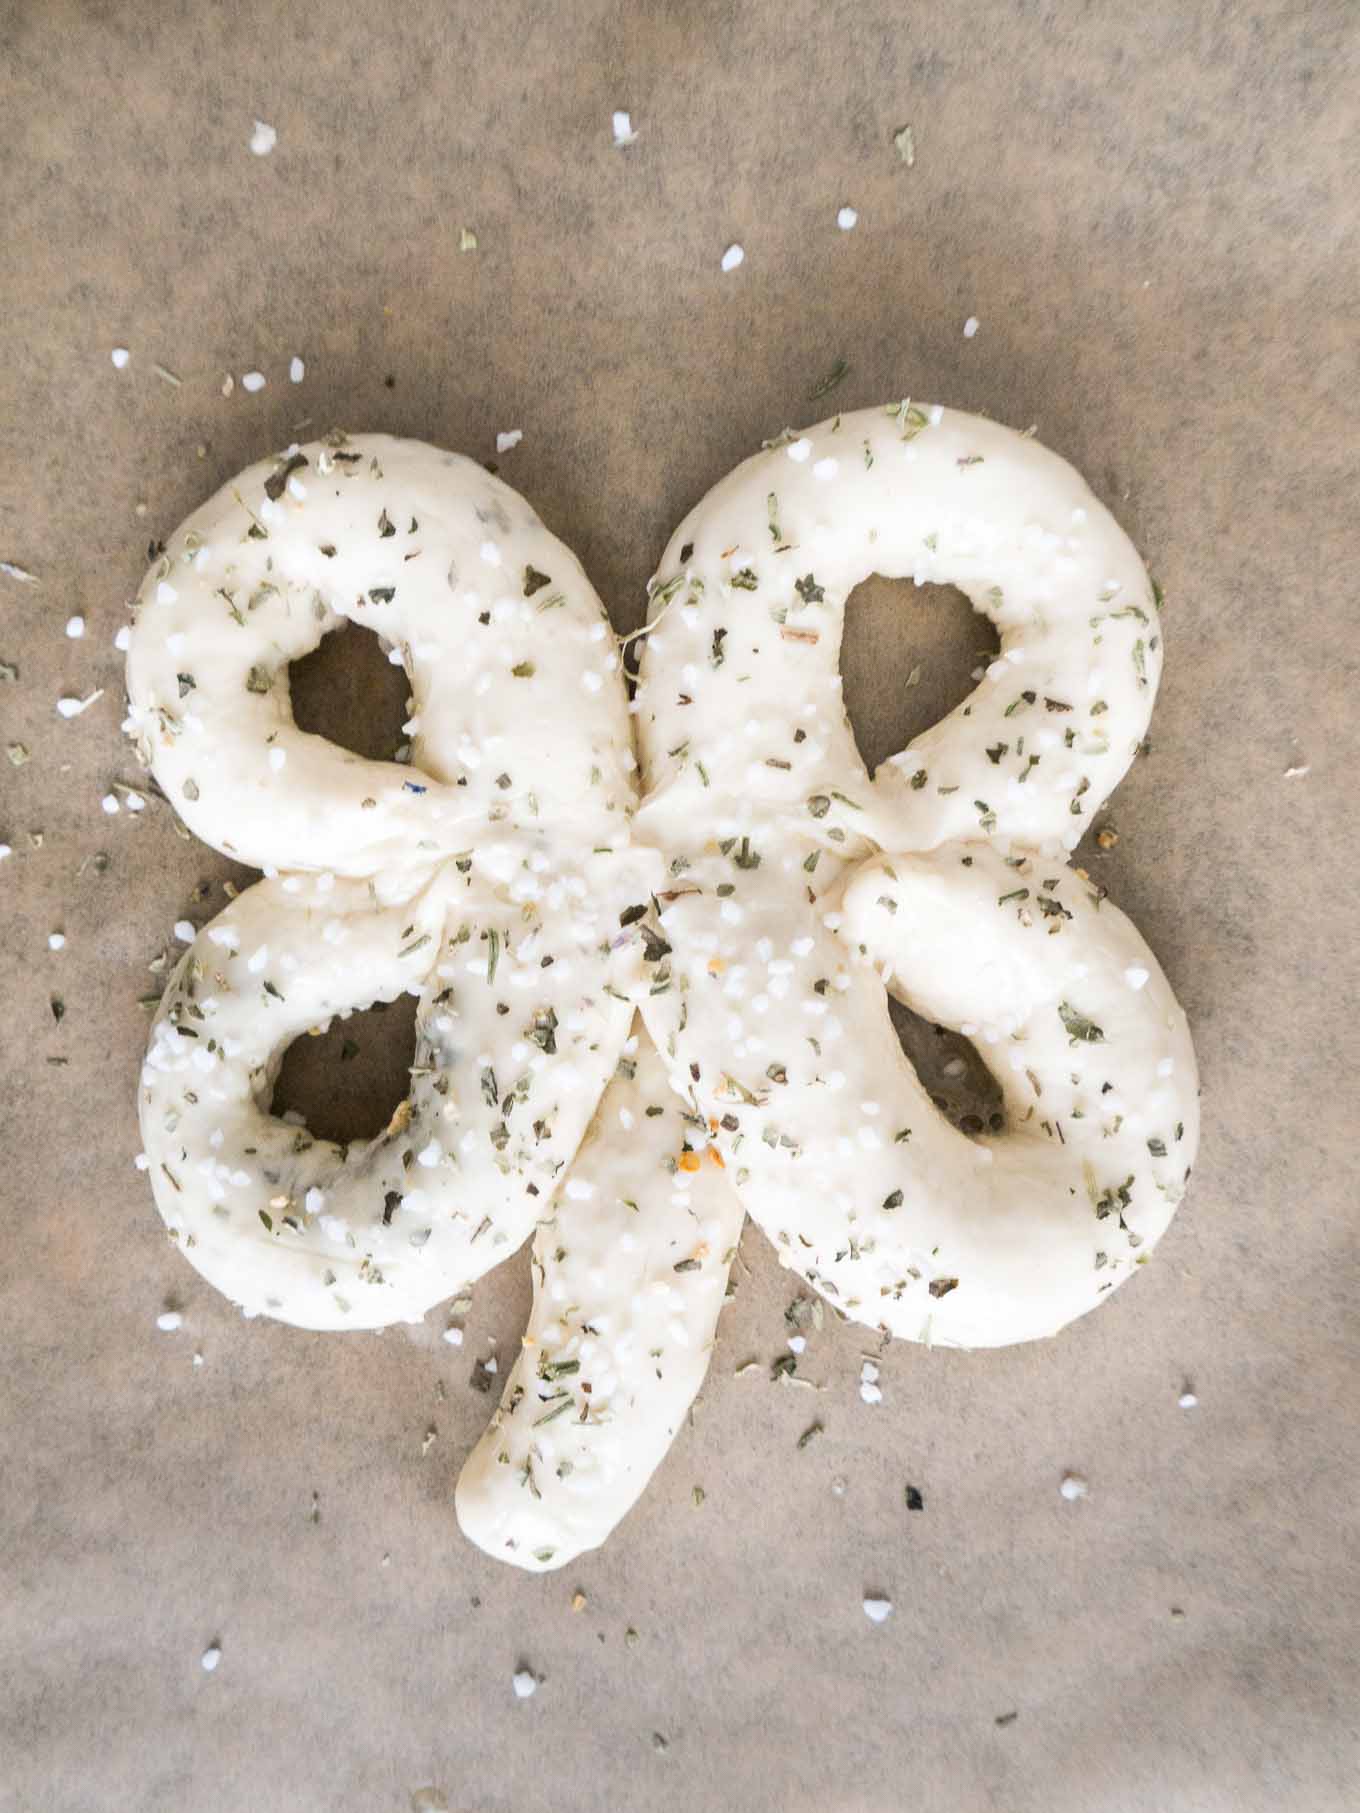 Dough shaped like a shamrock on brown parchment paper.